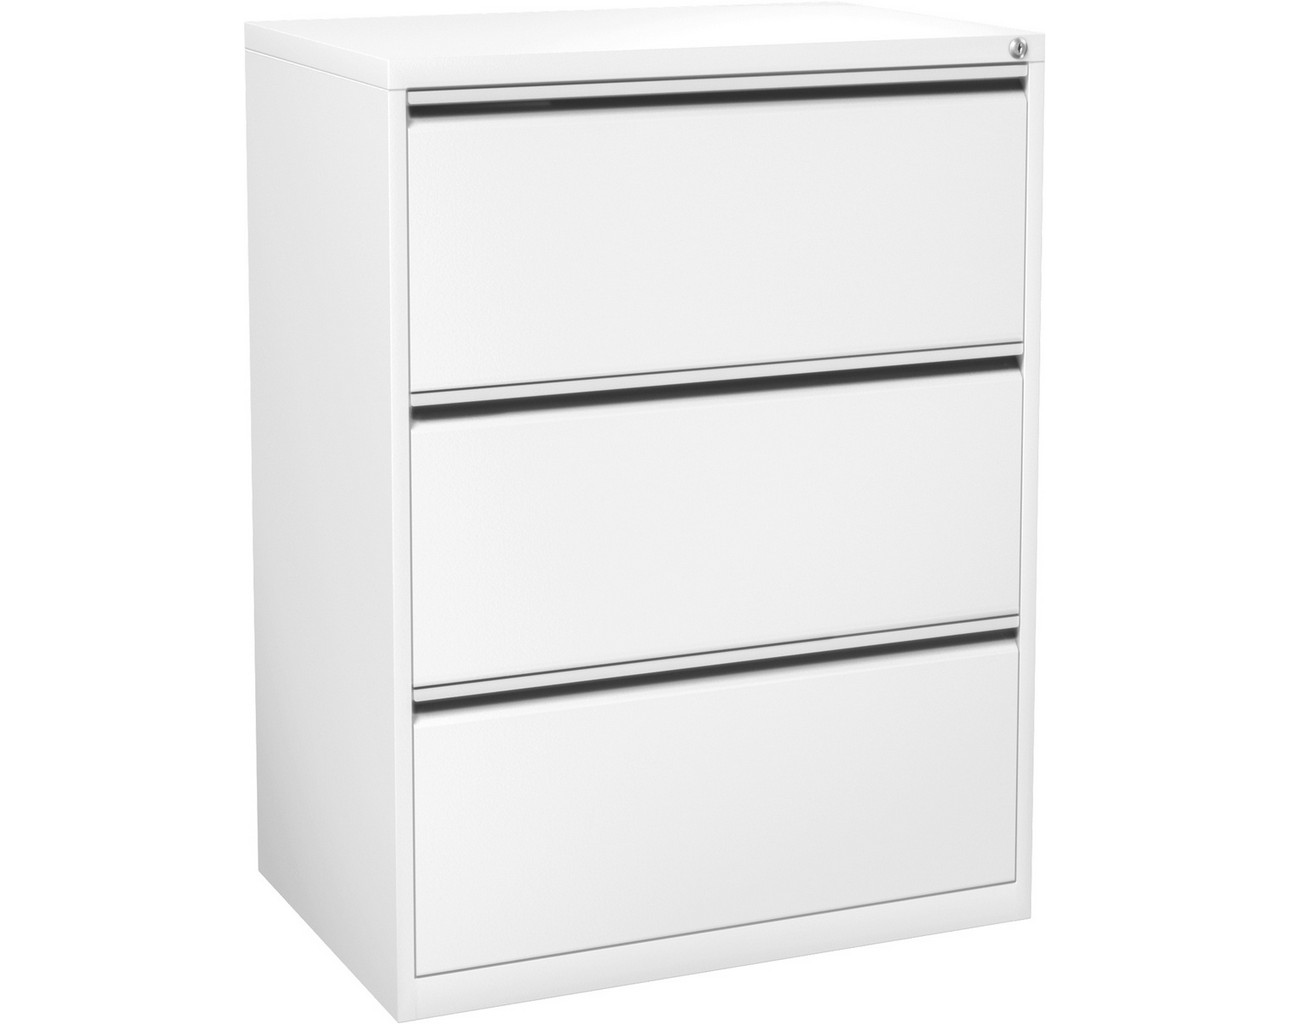 Steelwise Lateral Filing Cabinet - 3 Drawer in White